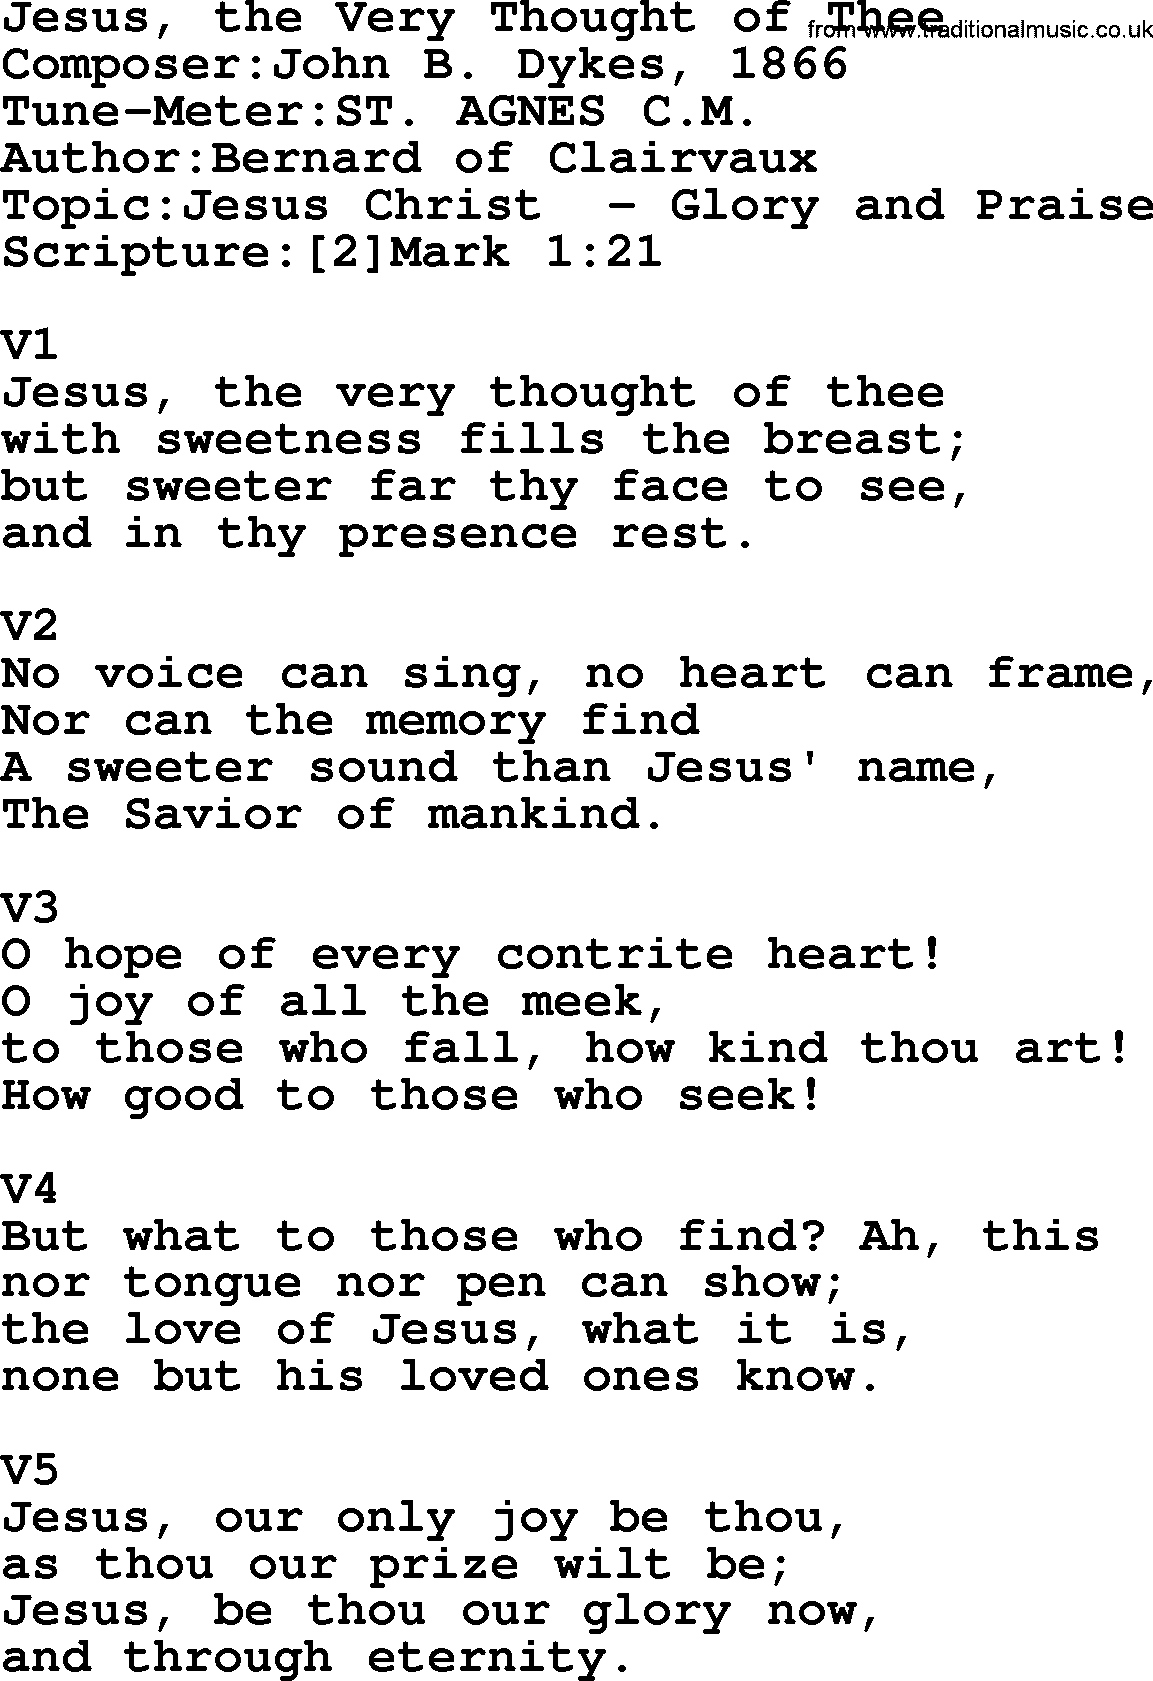 Adventist Hynms collection, Hymn: Jesus, The Very Thought Of Thee, lyrics with PDF